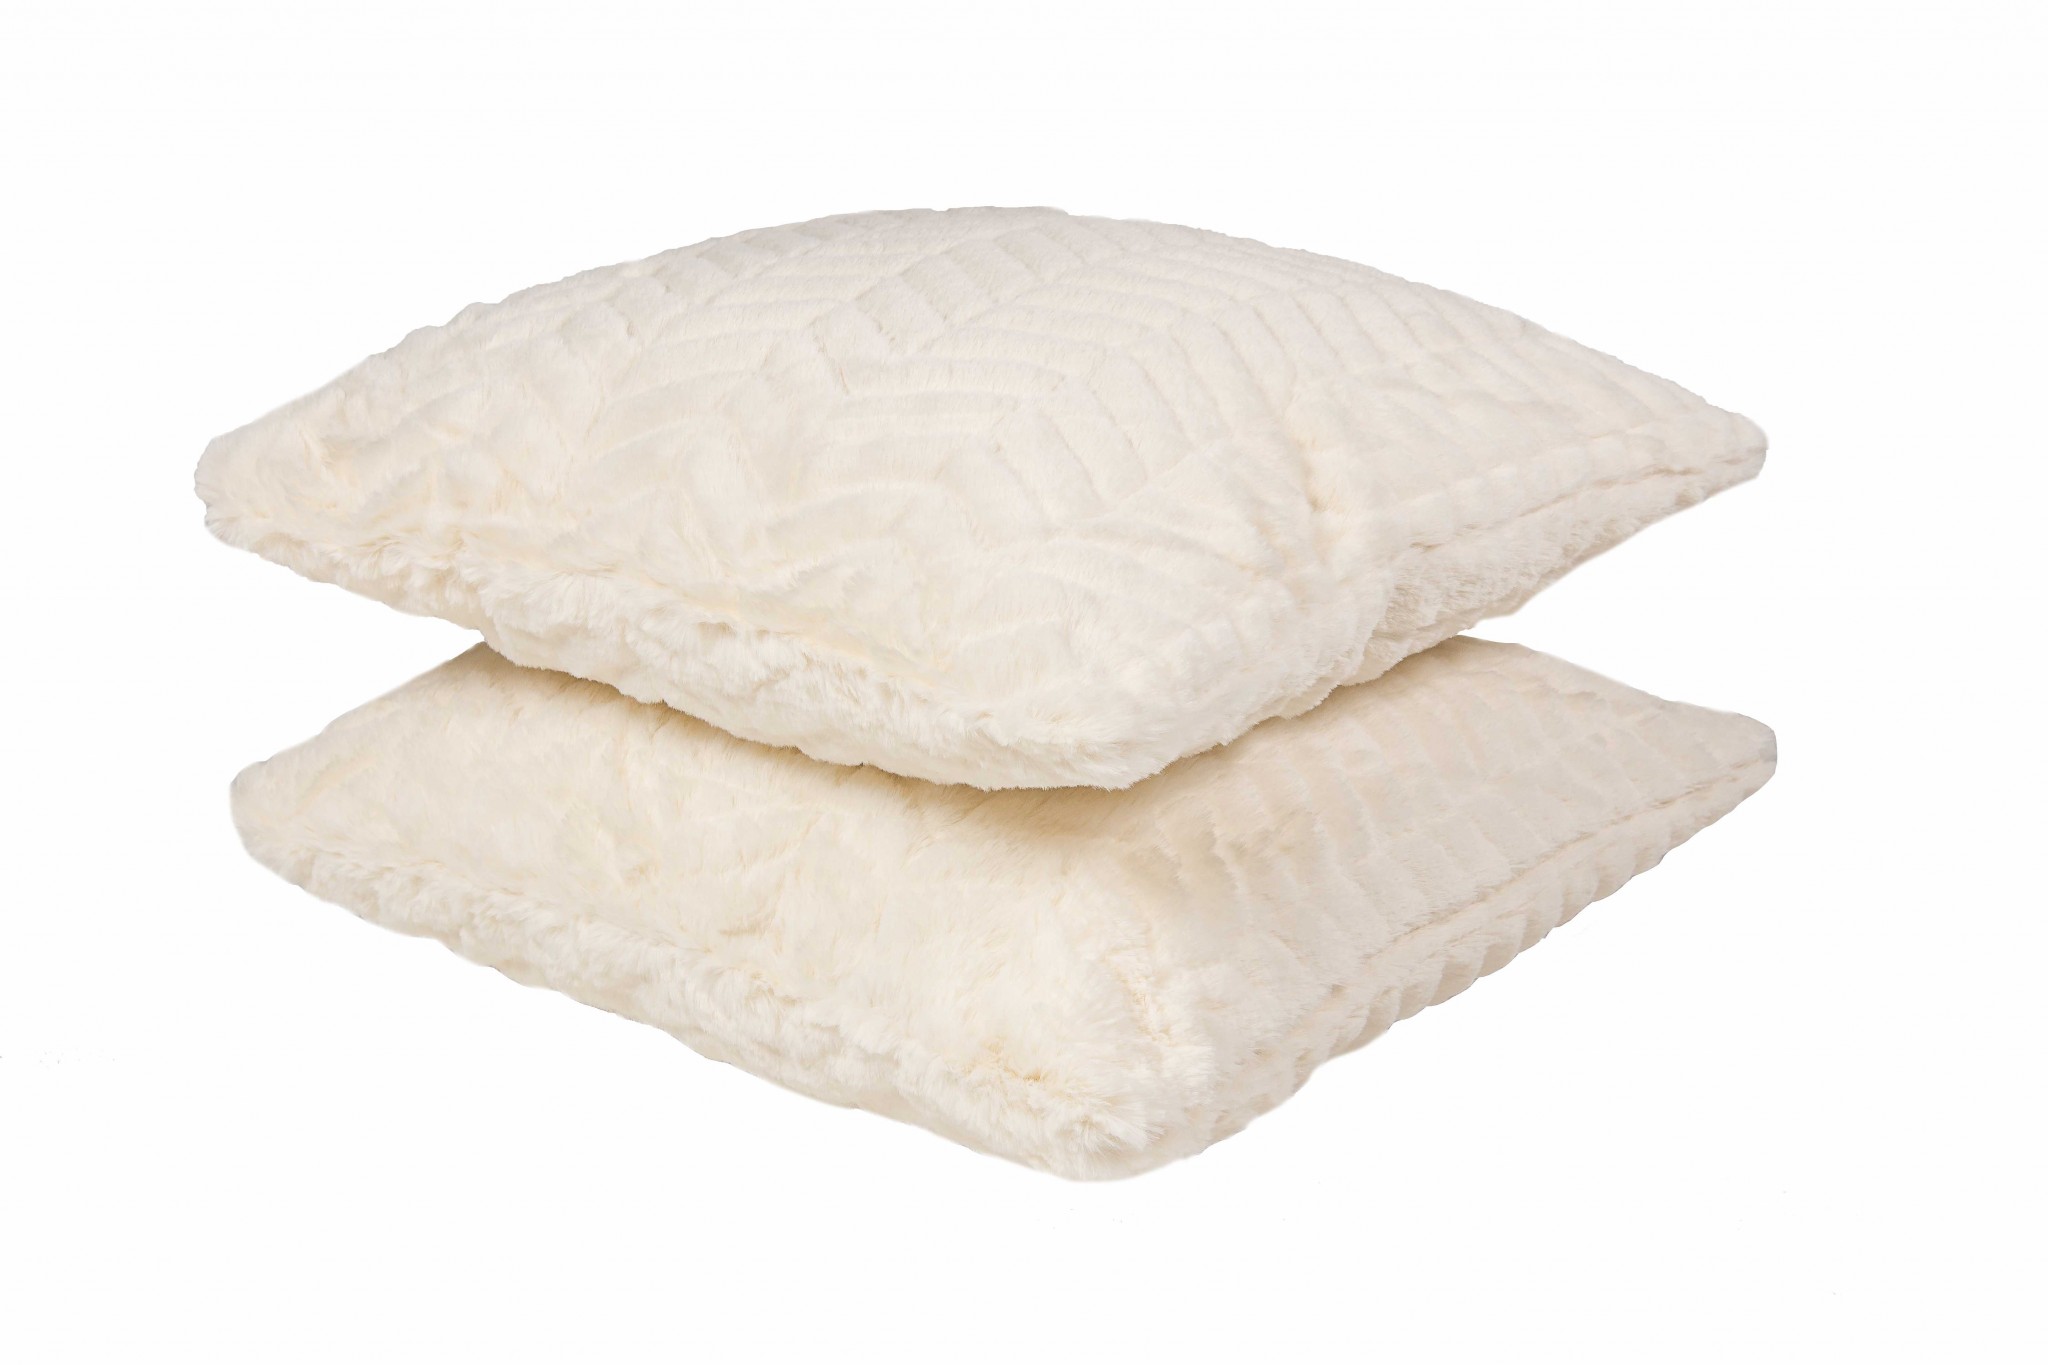 18" x 18" x 5" Crystal Off-White, Faux Fur - Pillow 2-Pack